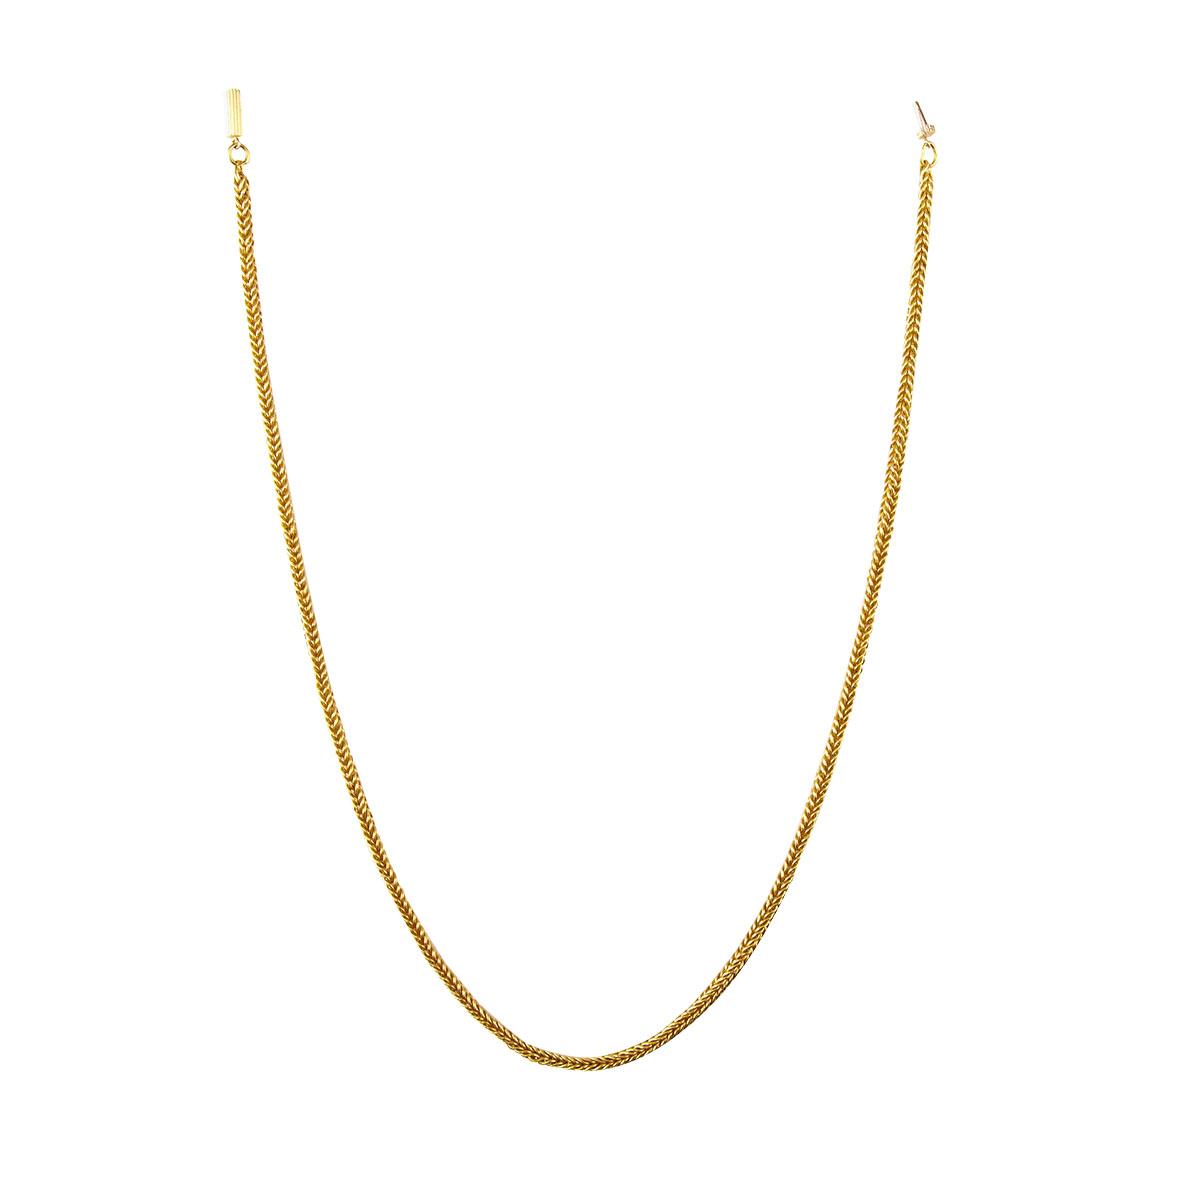 French 18k Yellow Gold Woven Serpentine Chain